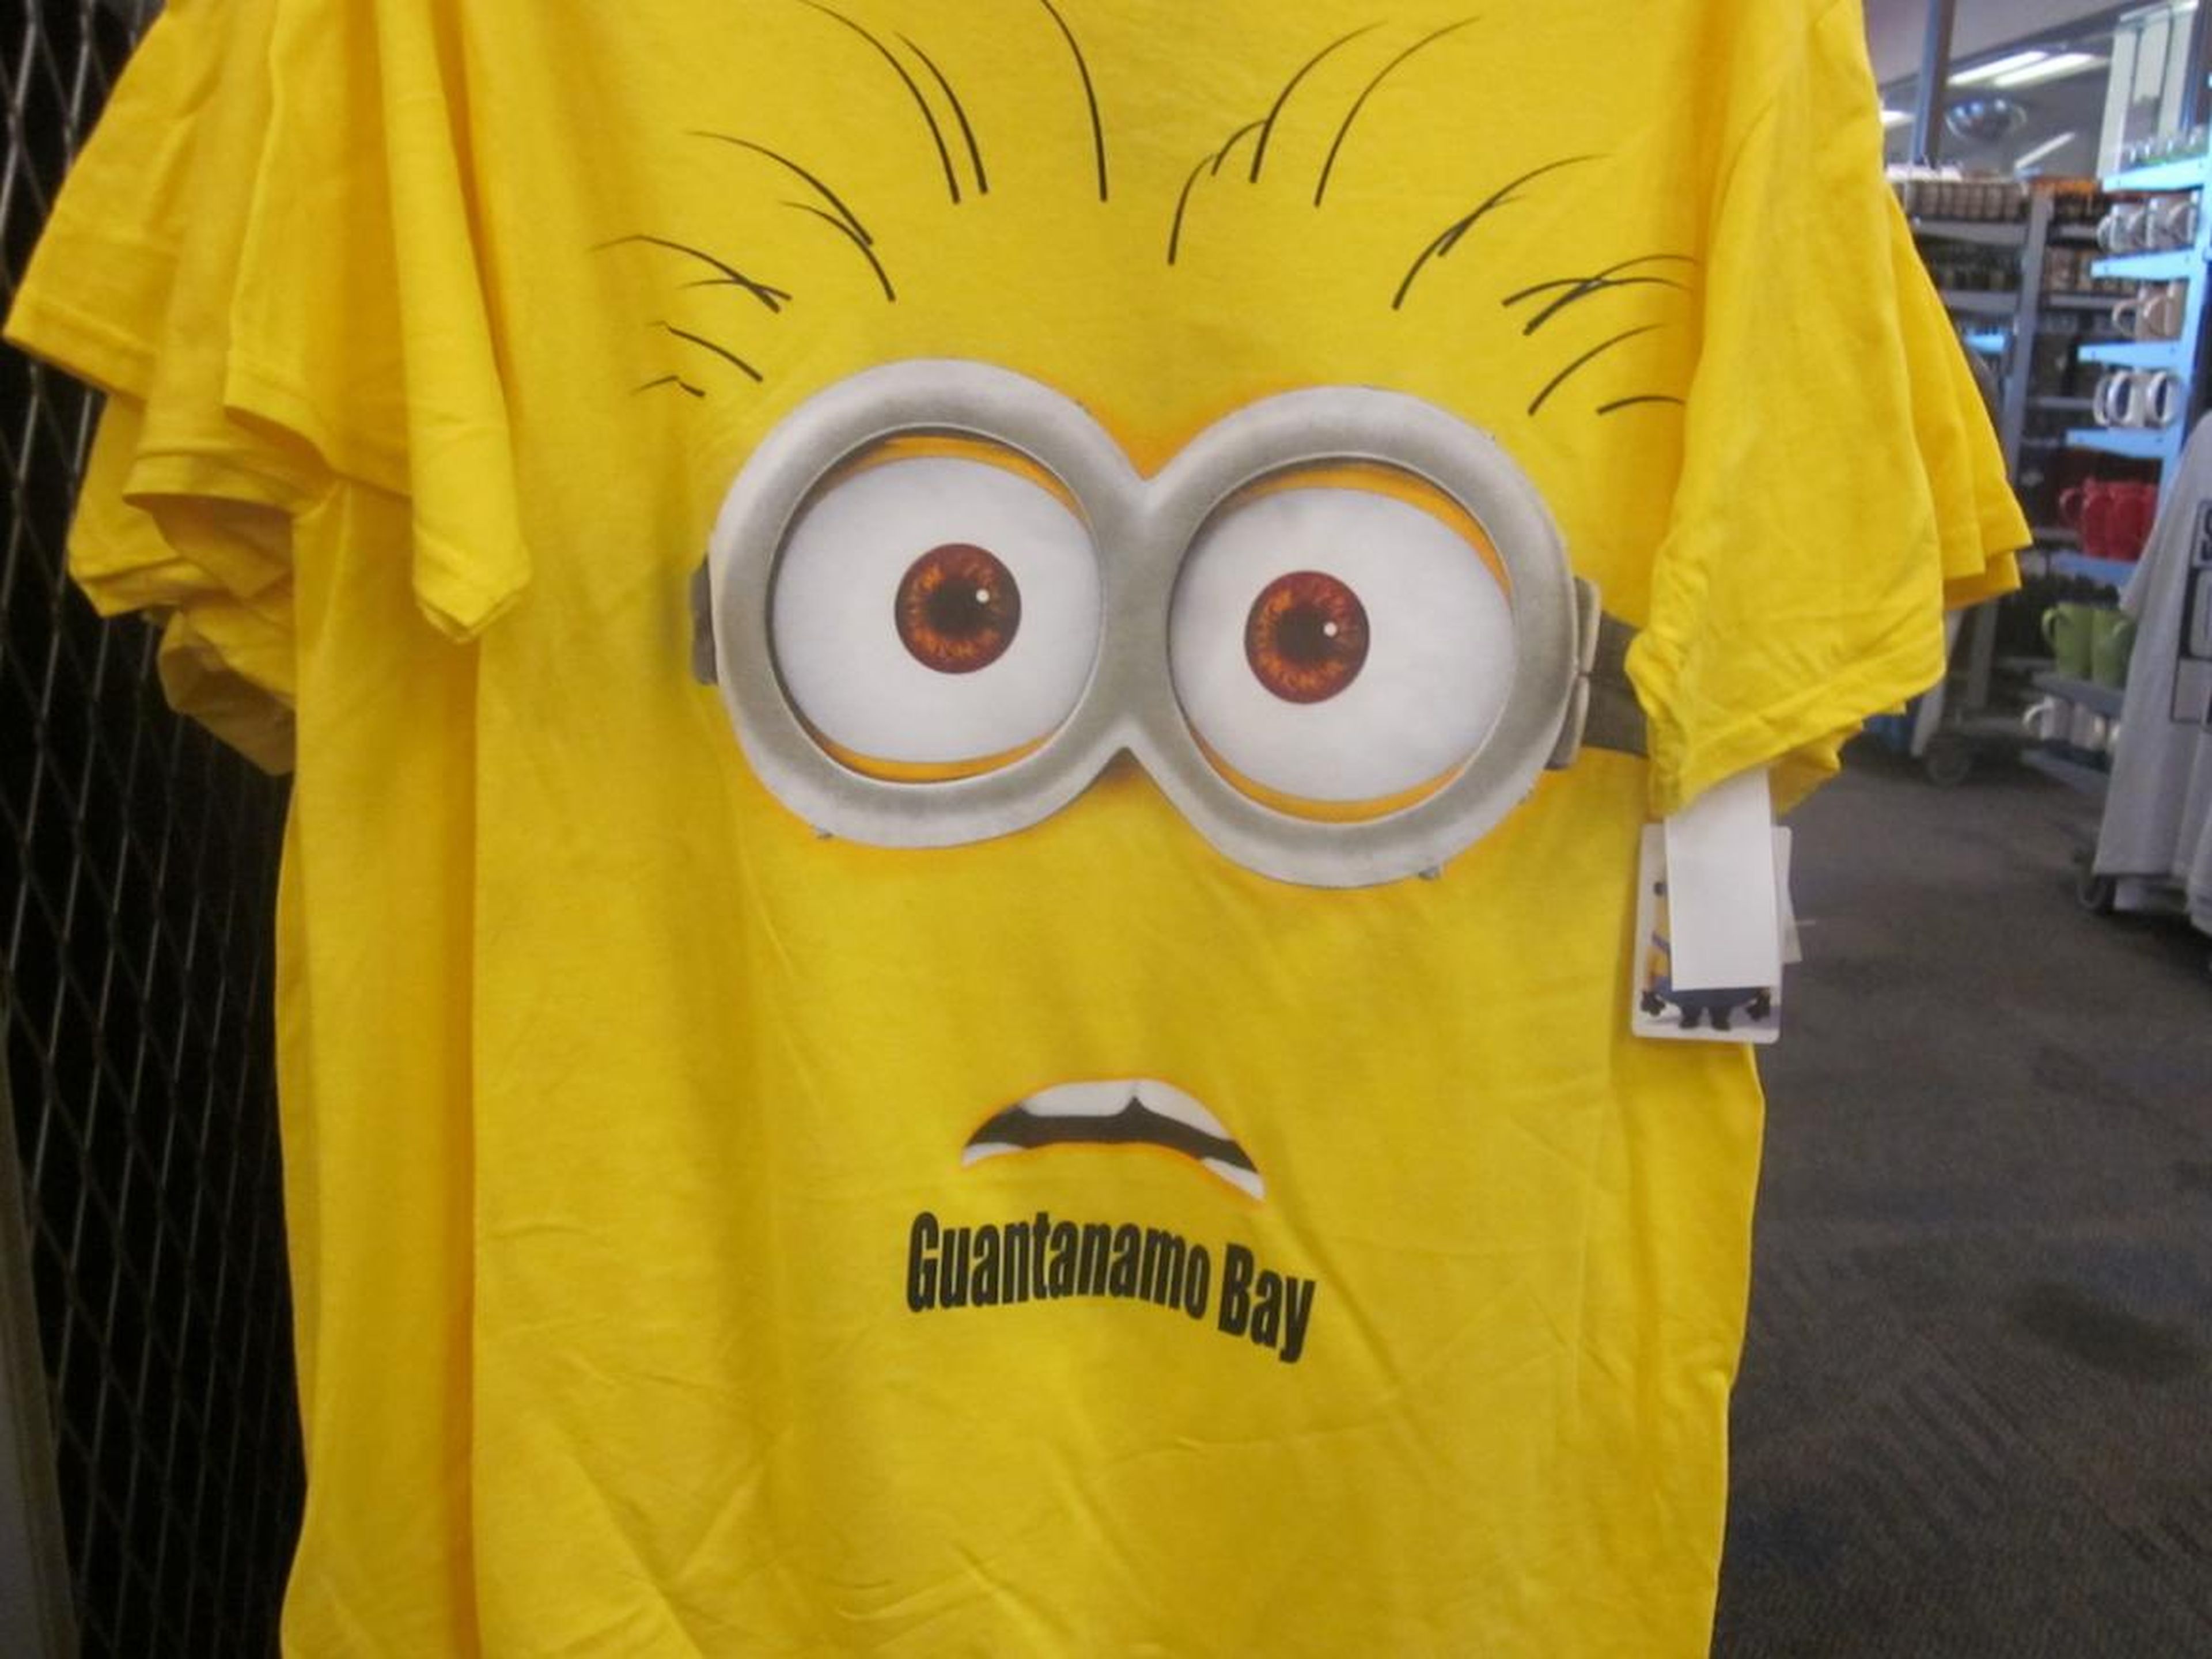 Less serious T-shirt options are also available. Here's a shirt depicting a shocked-looking minion — from the "Despicable Me" movie franchise — with the words "Guantanamo Bay" on its chin.